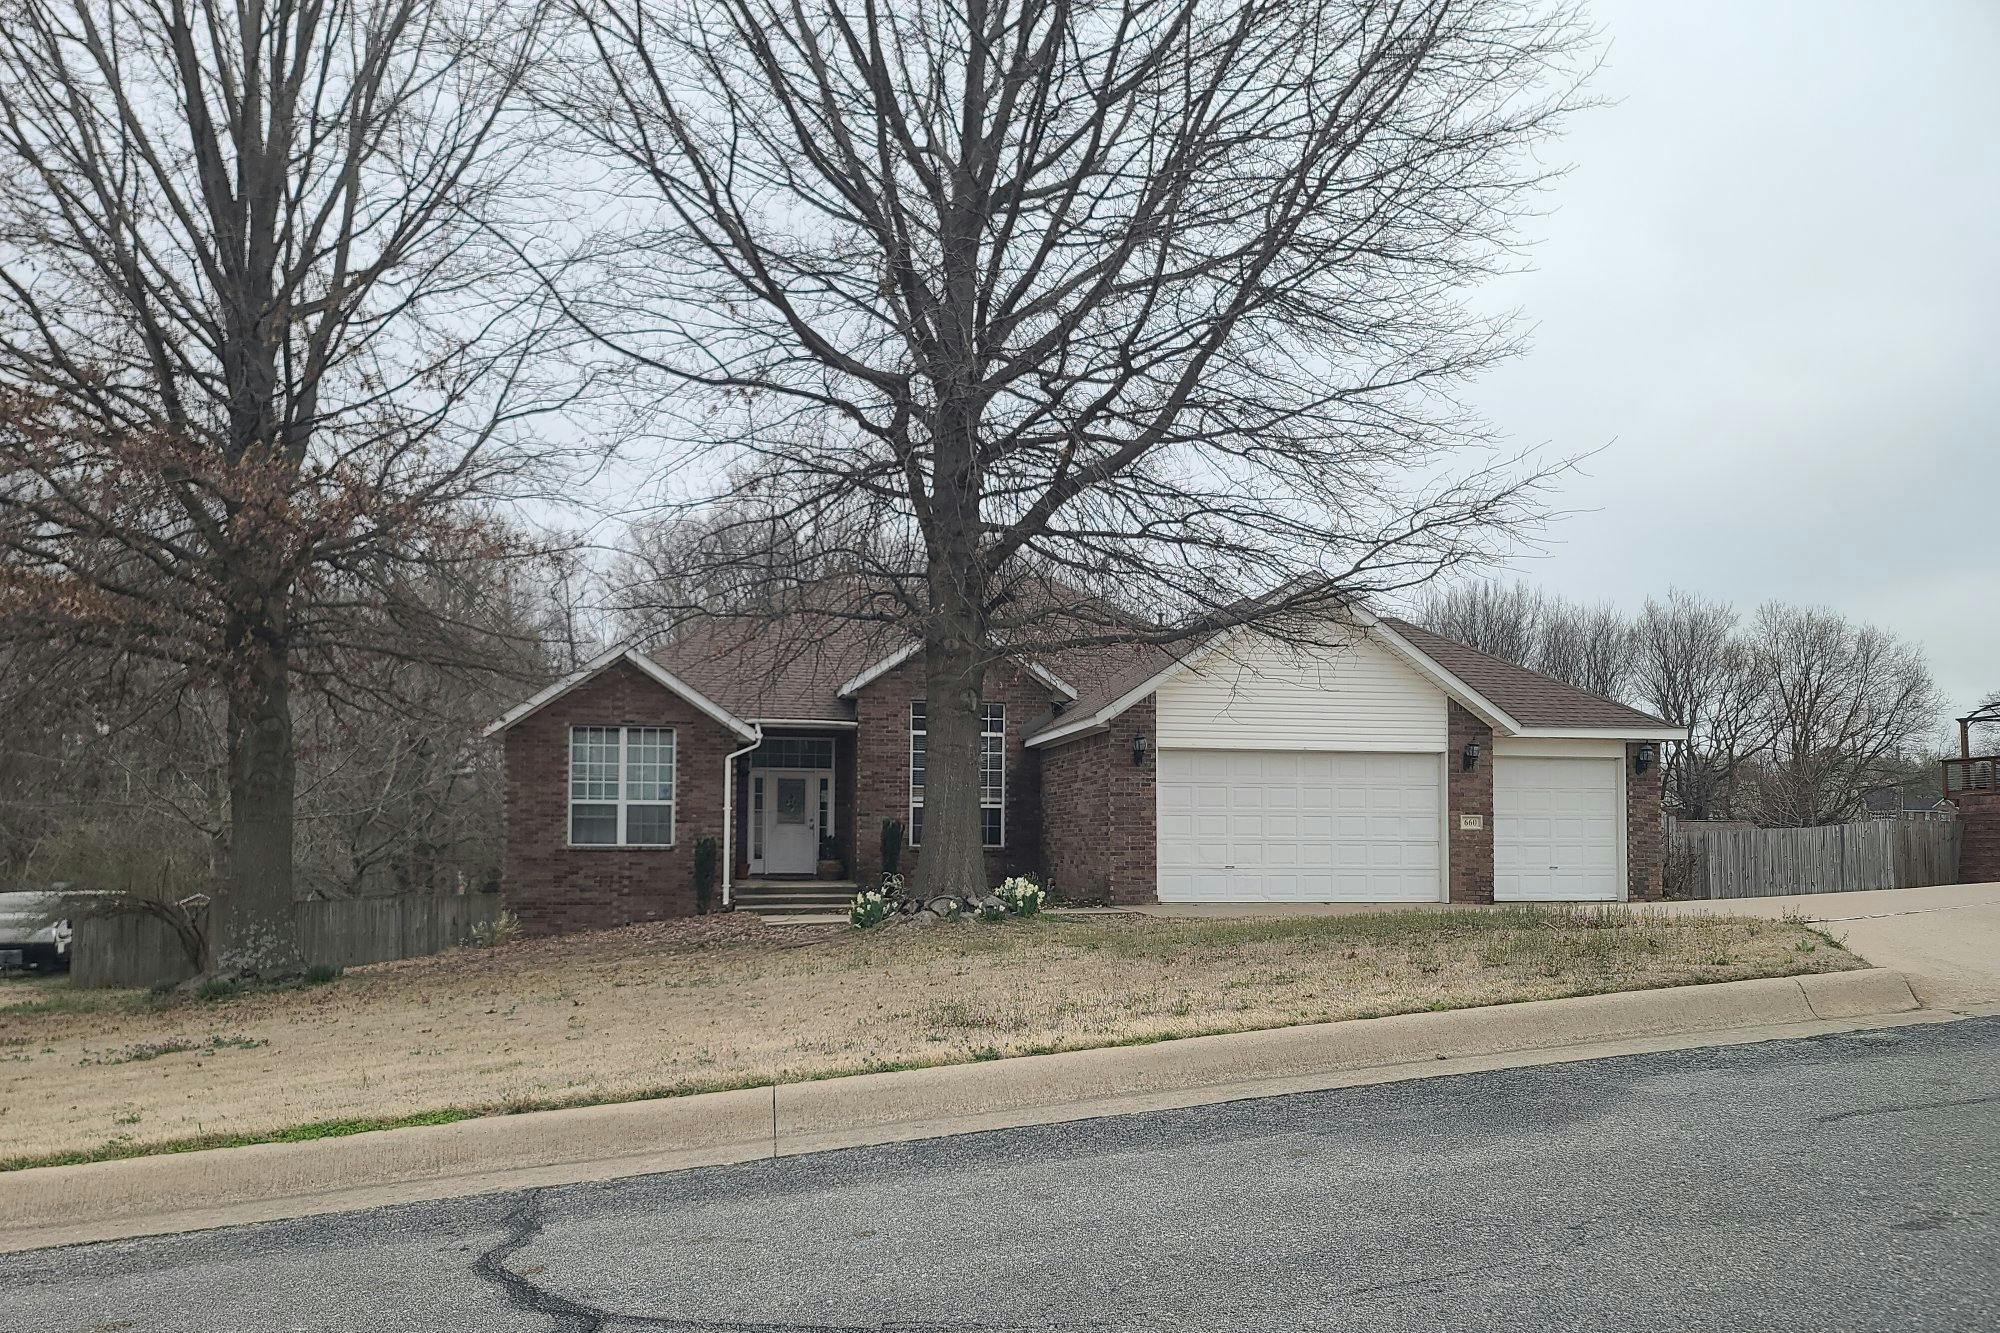 Whitcliff Dr, Cave Springs, AR 72718 #1